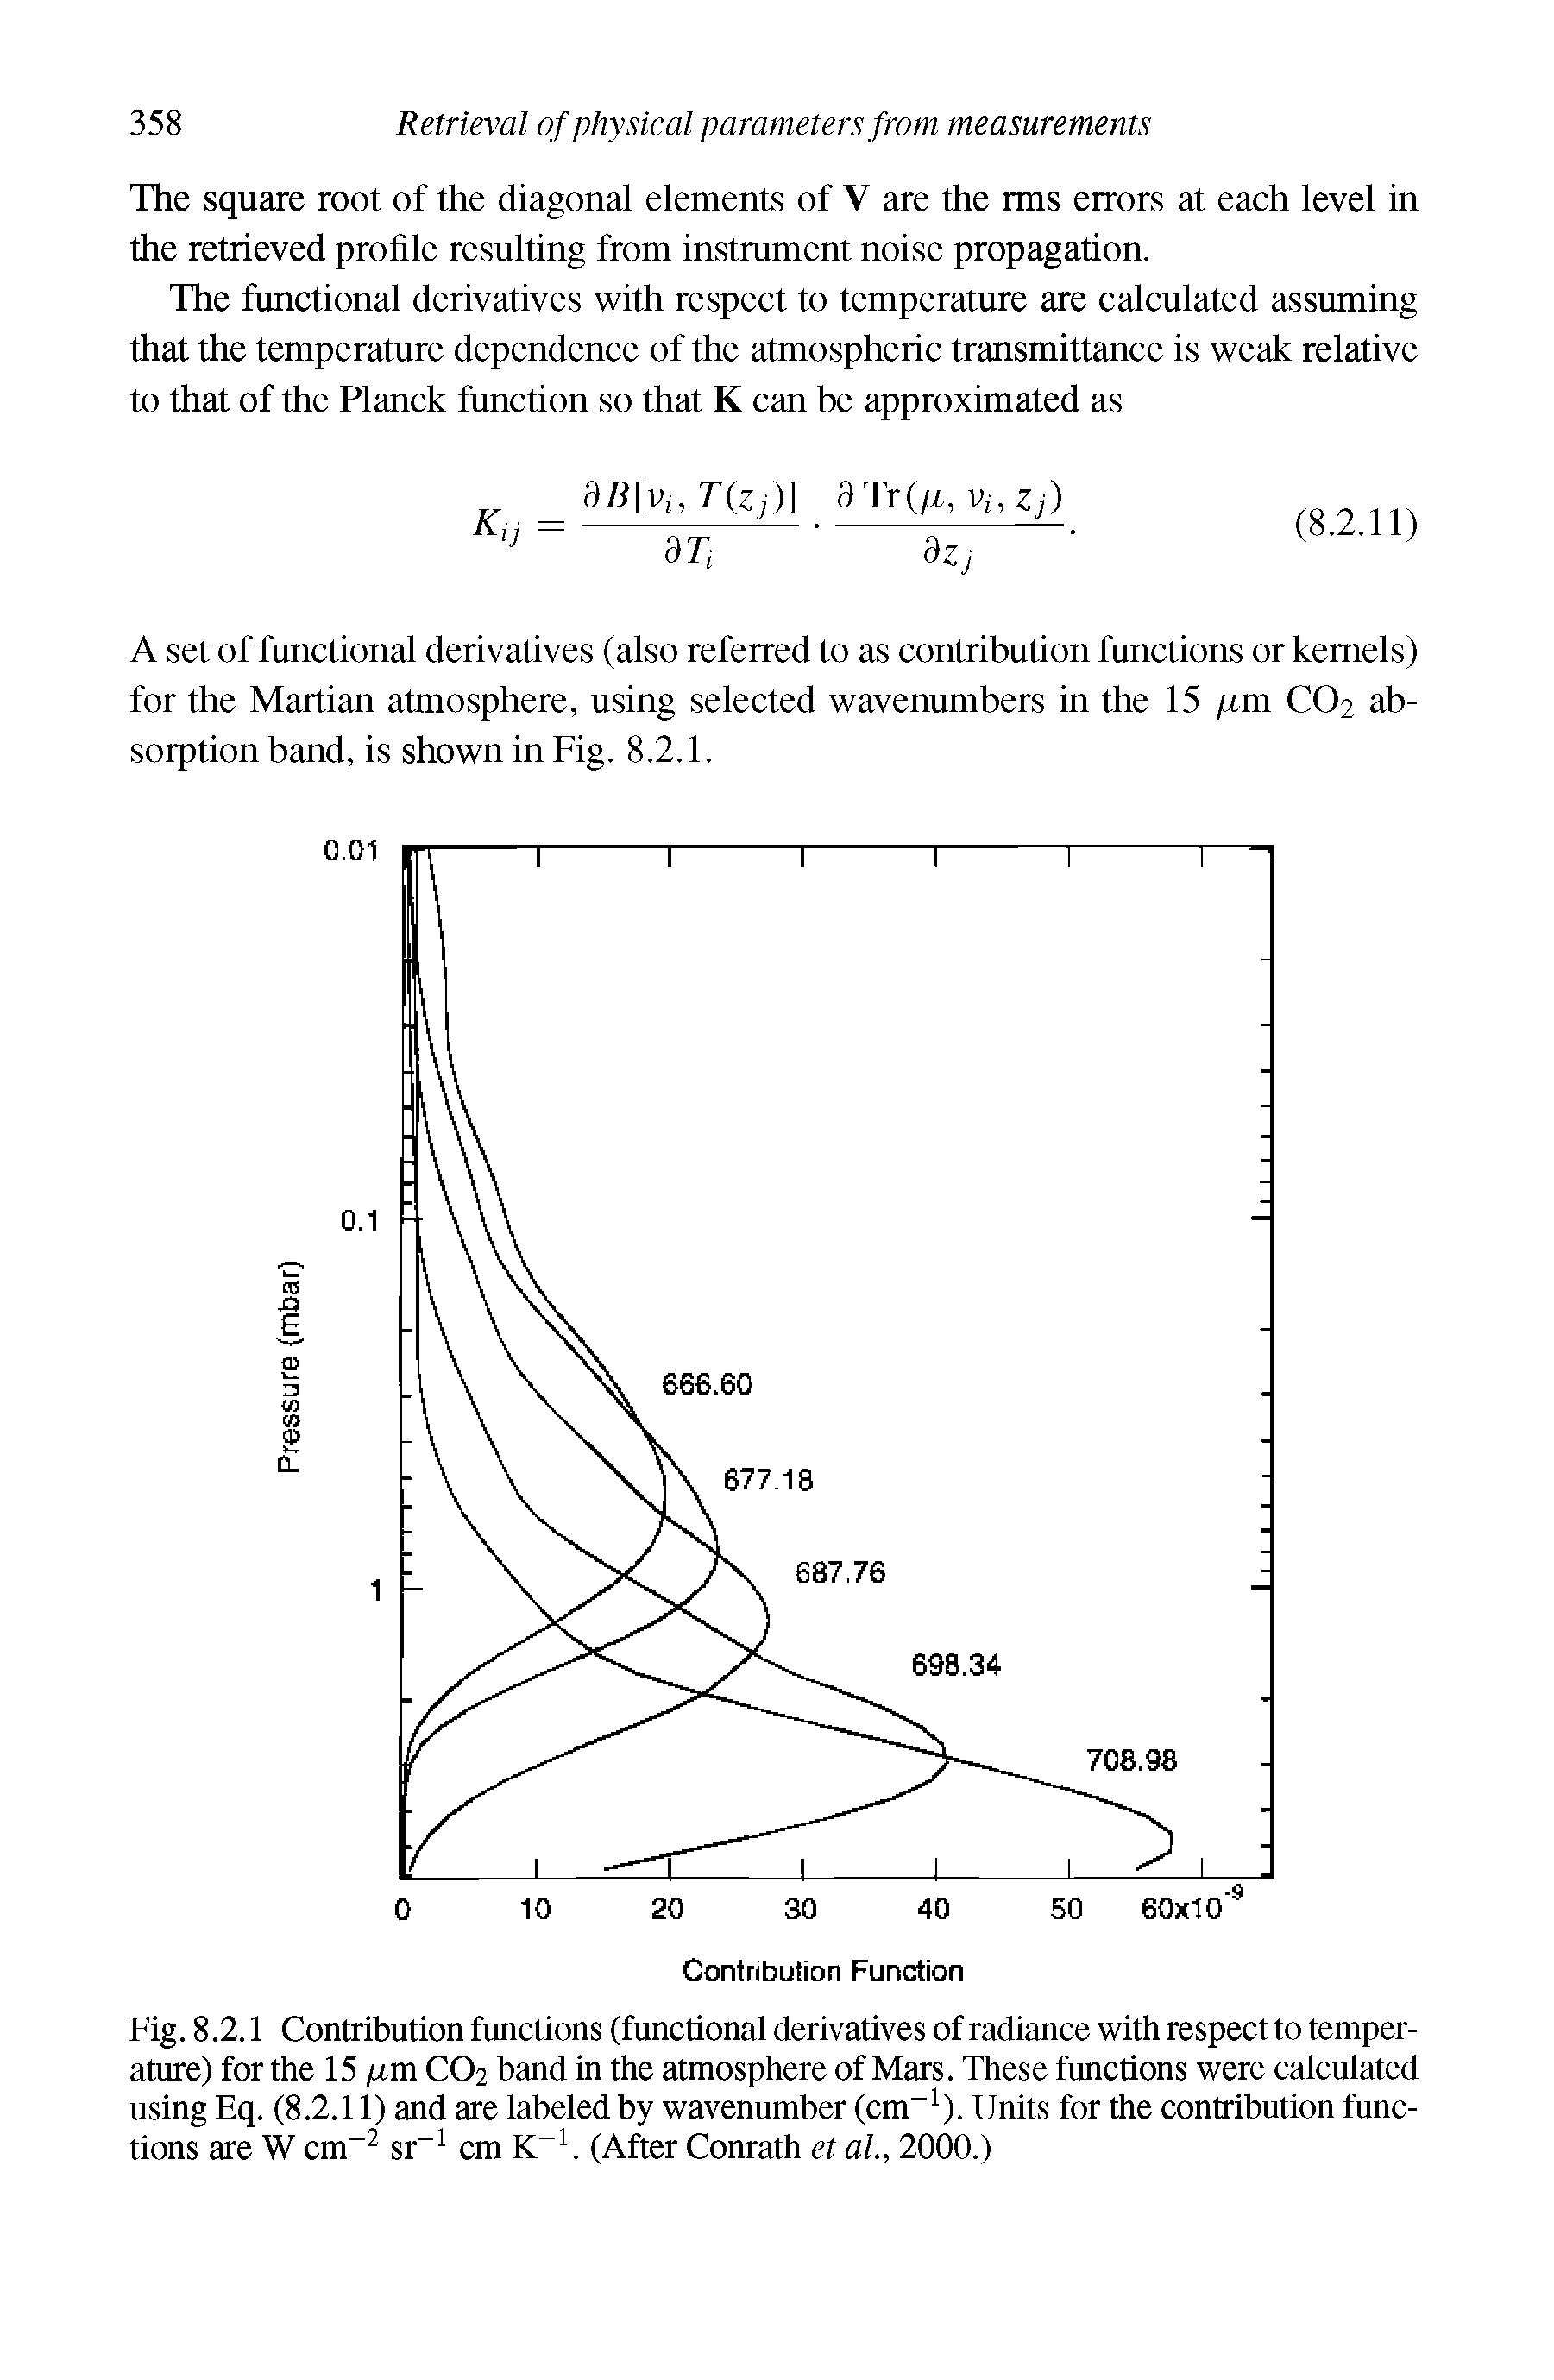 Fig. 8.2.1 Contribution functions (functional derivatives of radiance with respect to temperature) for the 15 pirn CO2 band in the atmosphere of Mars. These functions were calculated using Eq. (8.2.11) and are labeled by wavenumber (cm ). Units for the contribution functions are W cm sr cm K (After Conrath et al, 2000.)...